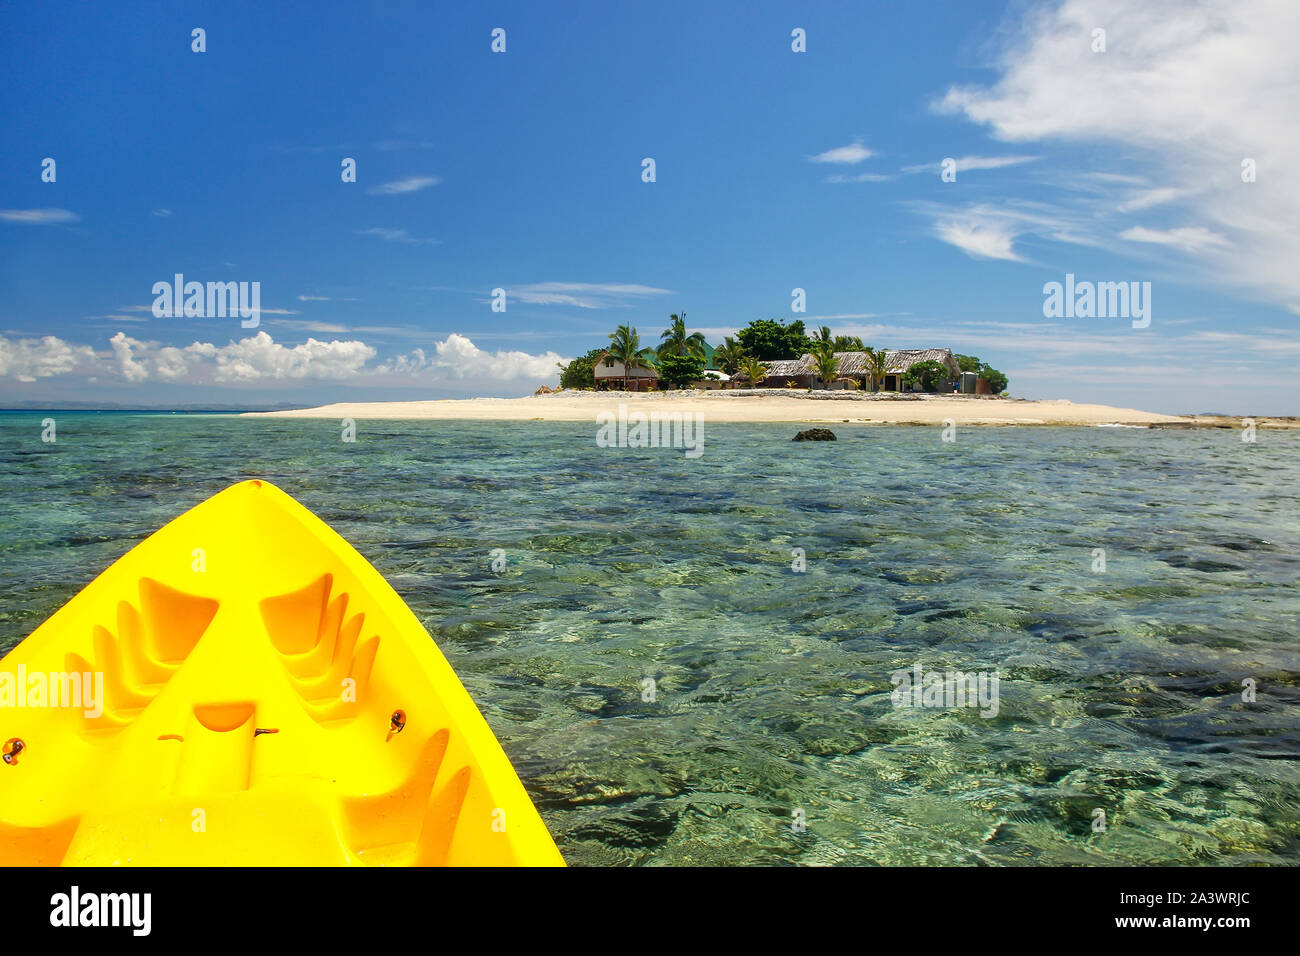 Kayaking near South Sea Island, Mamanuca islands group, Fiji. This group consists of about 20 islands. Stock Photo